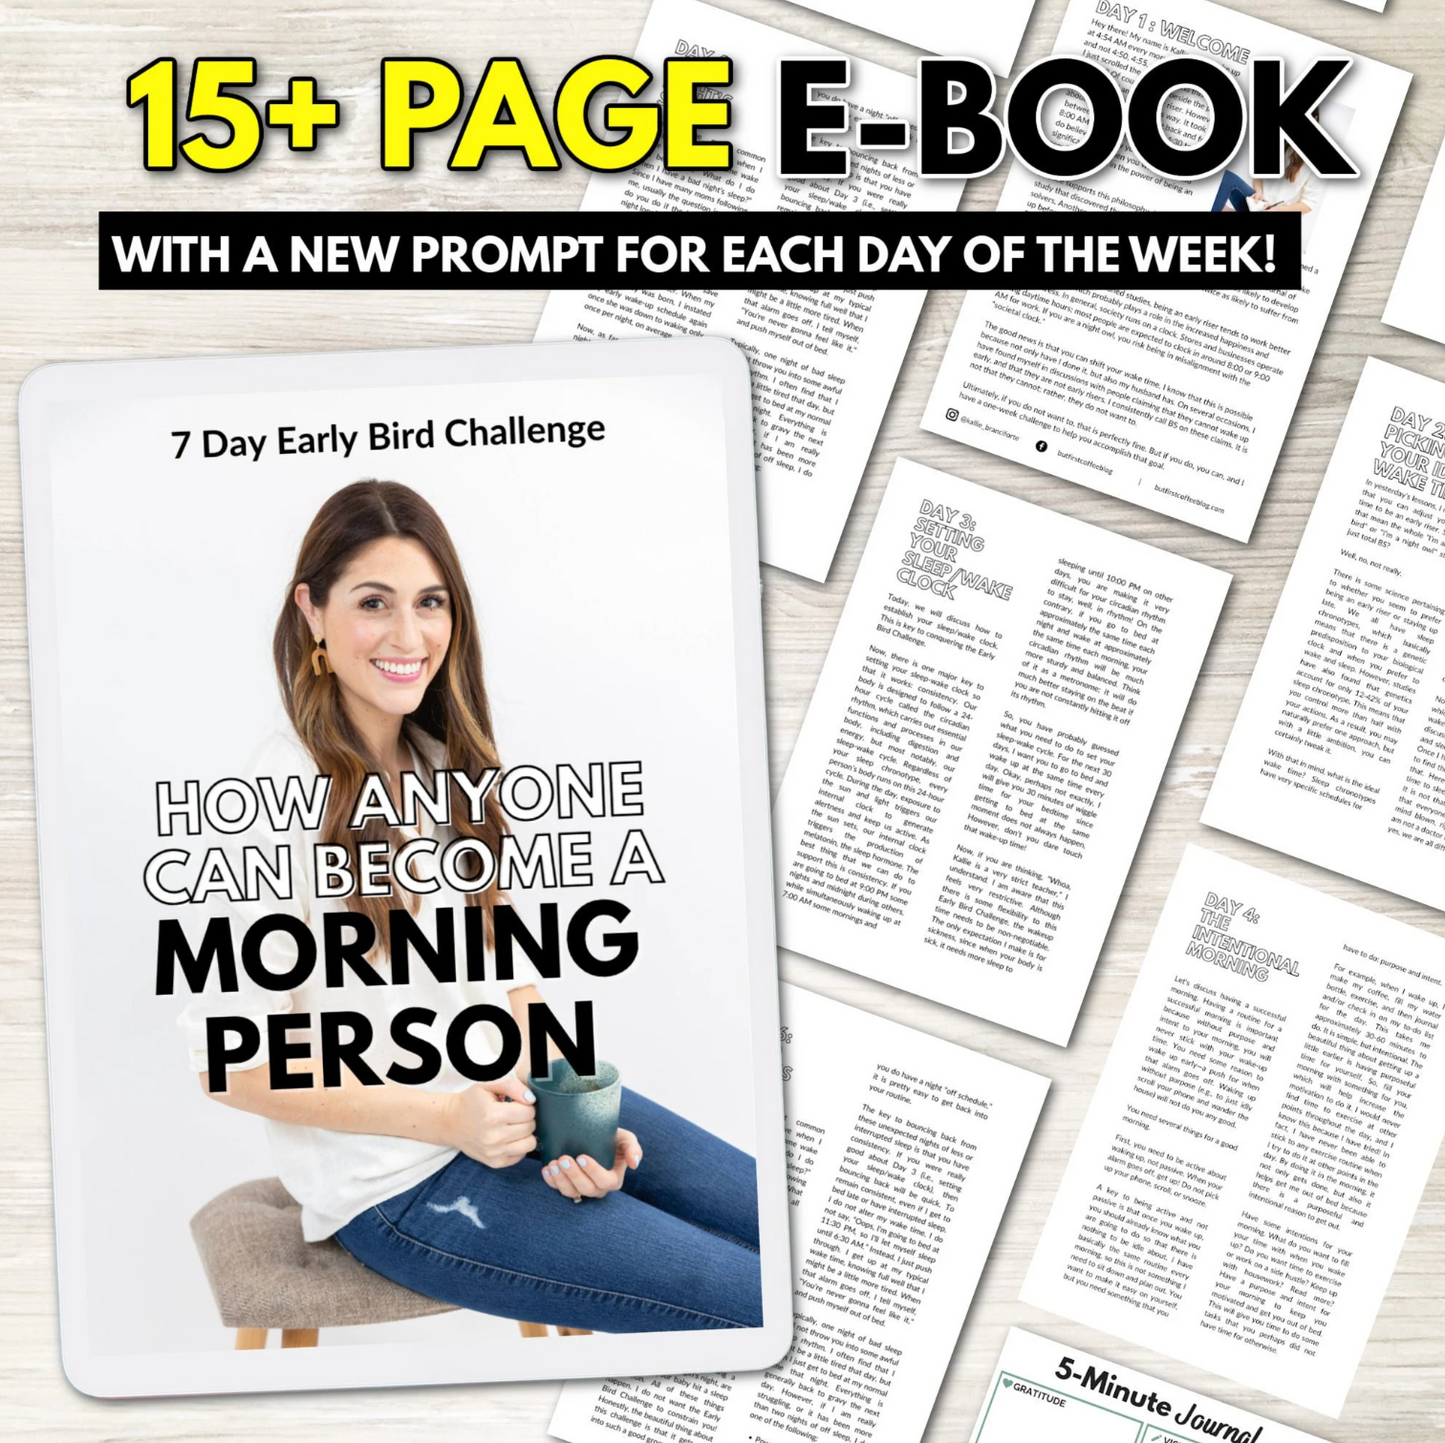 How to Become a Morning Person E-Book